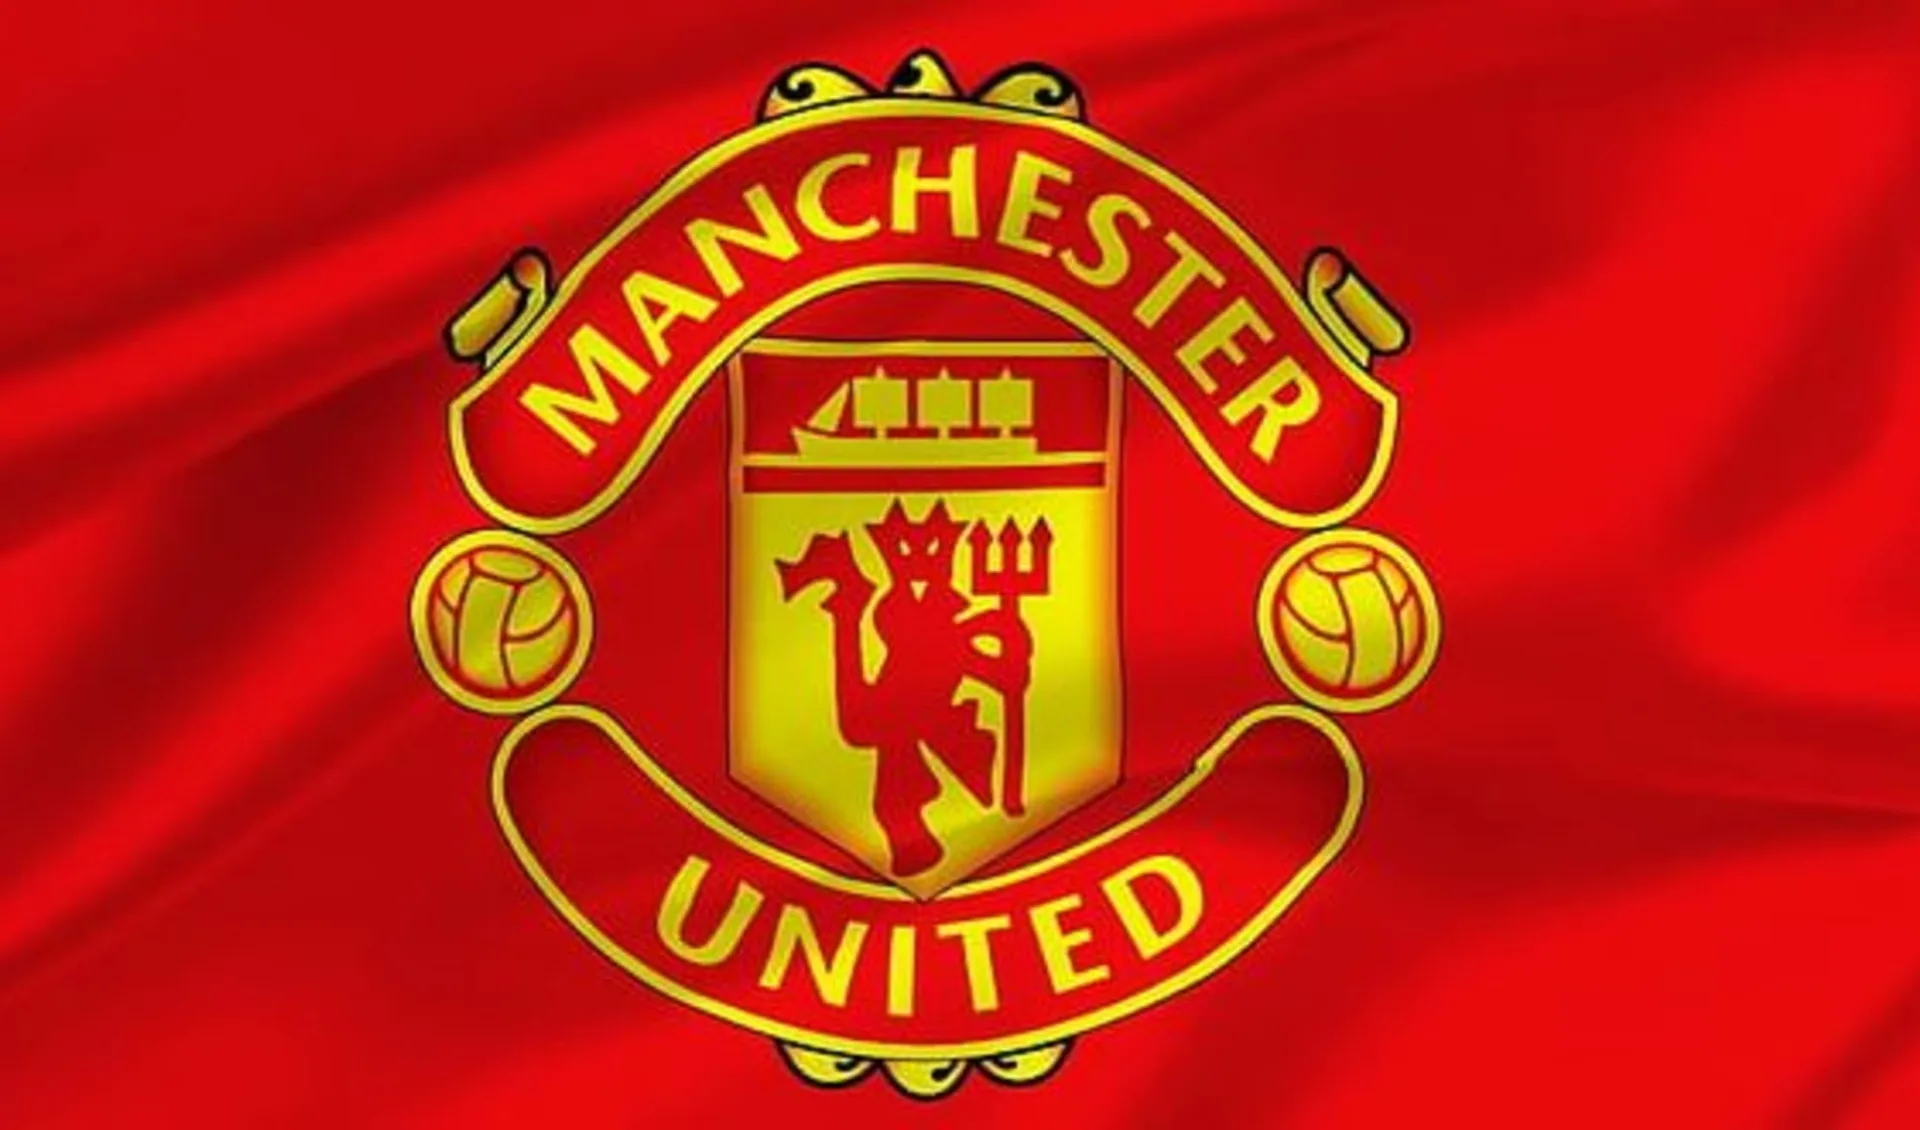 Manchester United: Manchester United